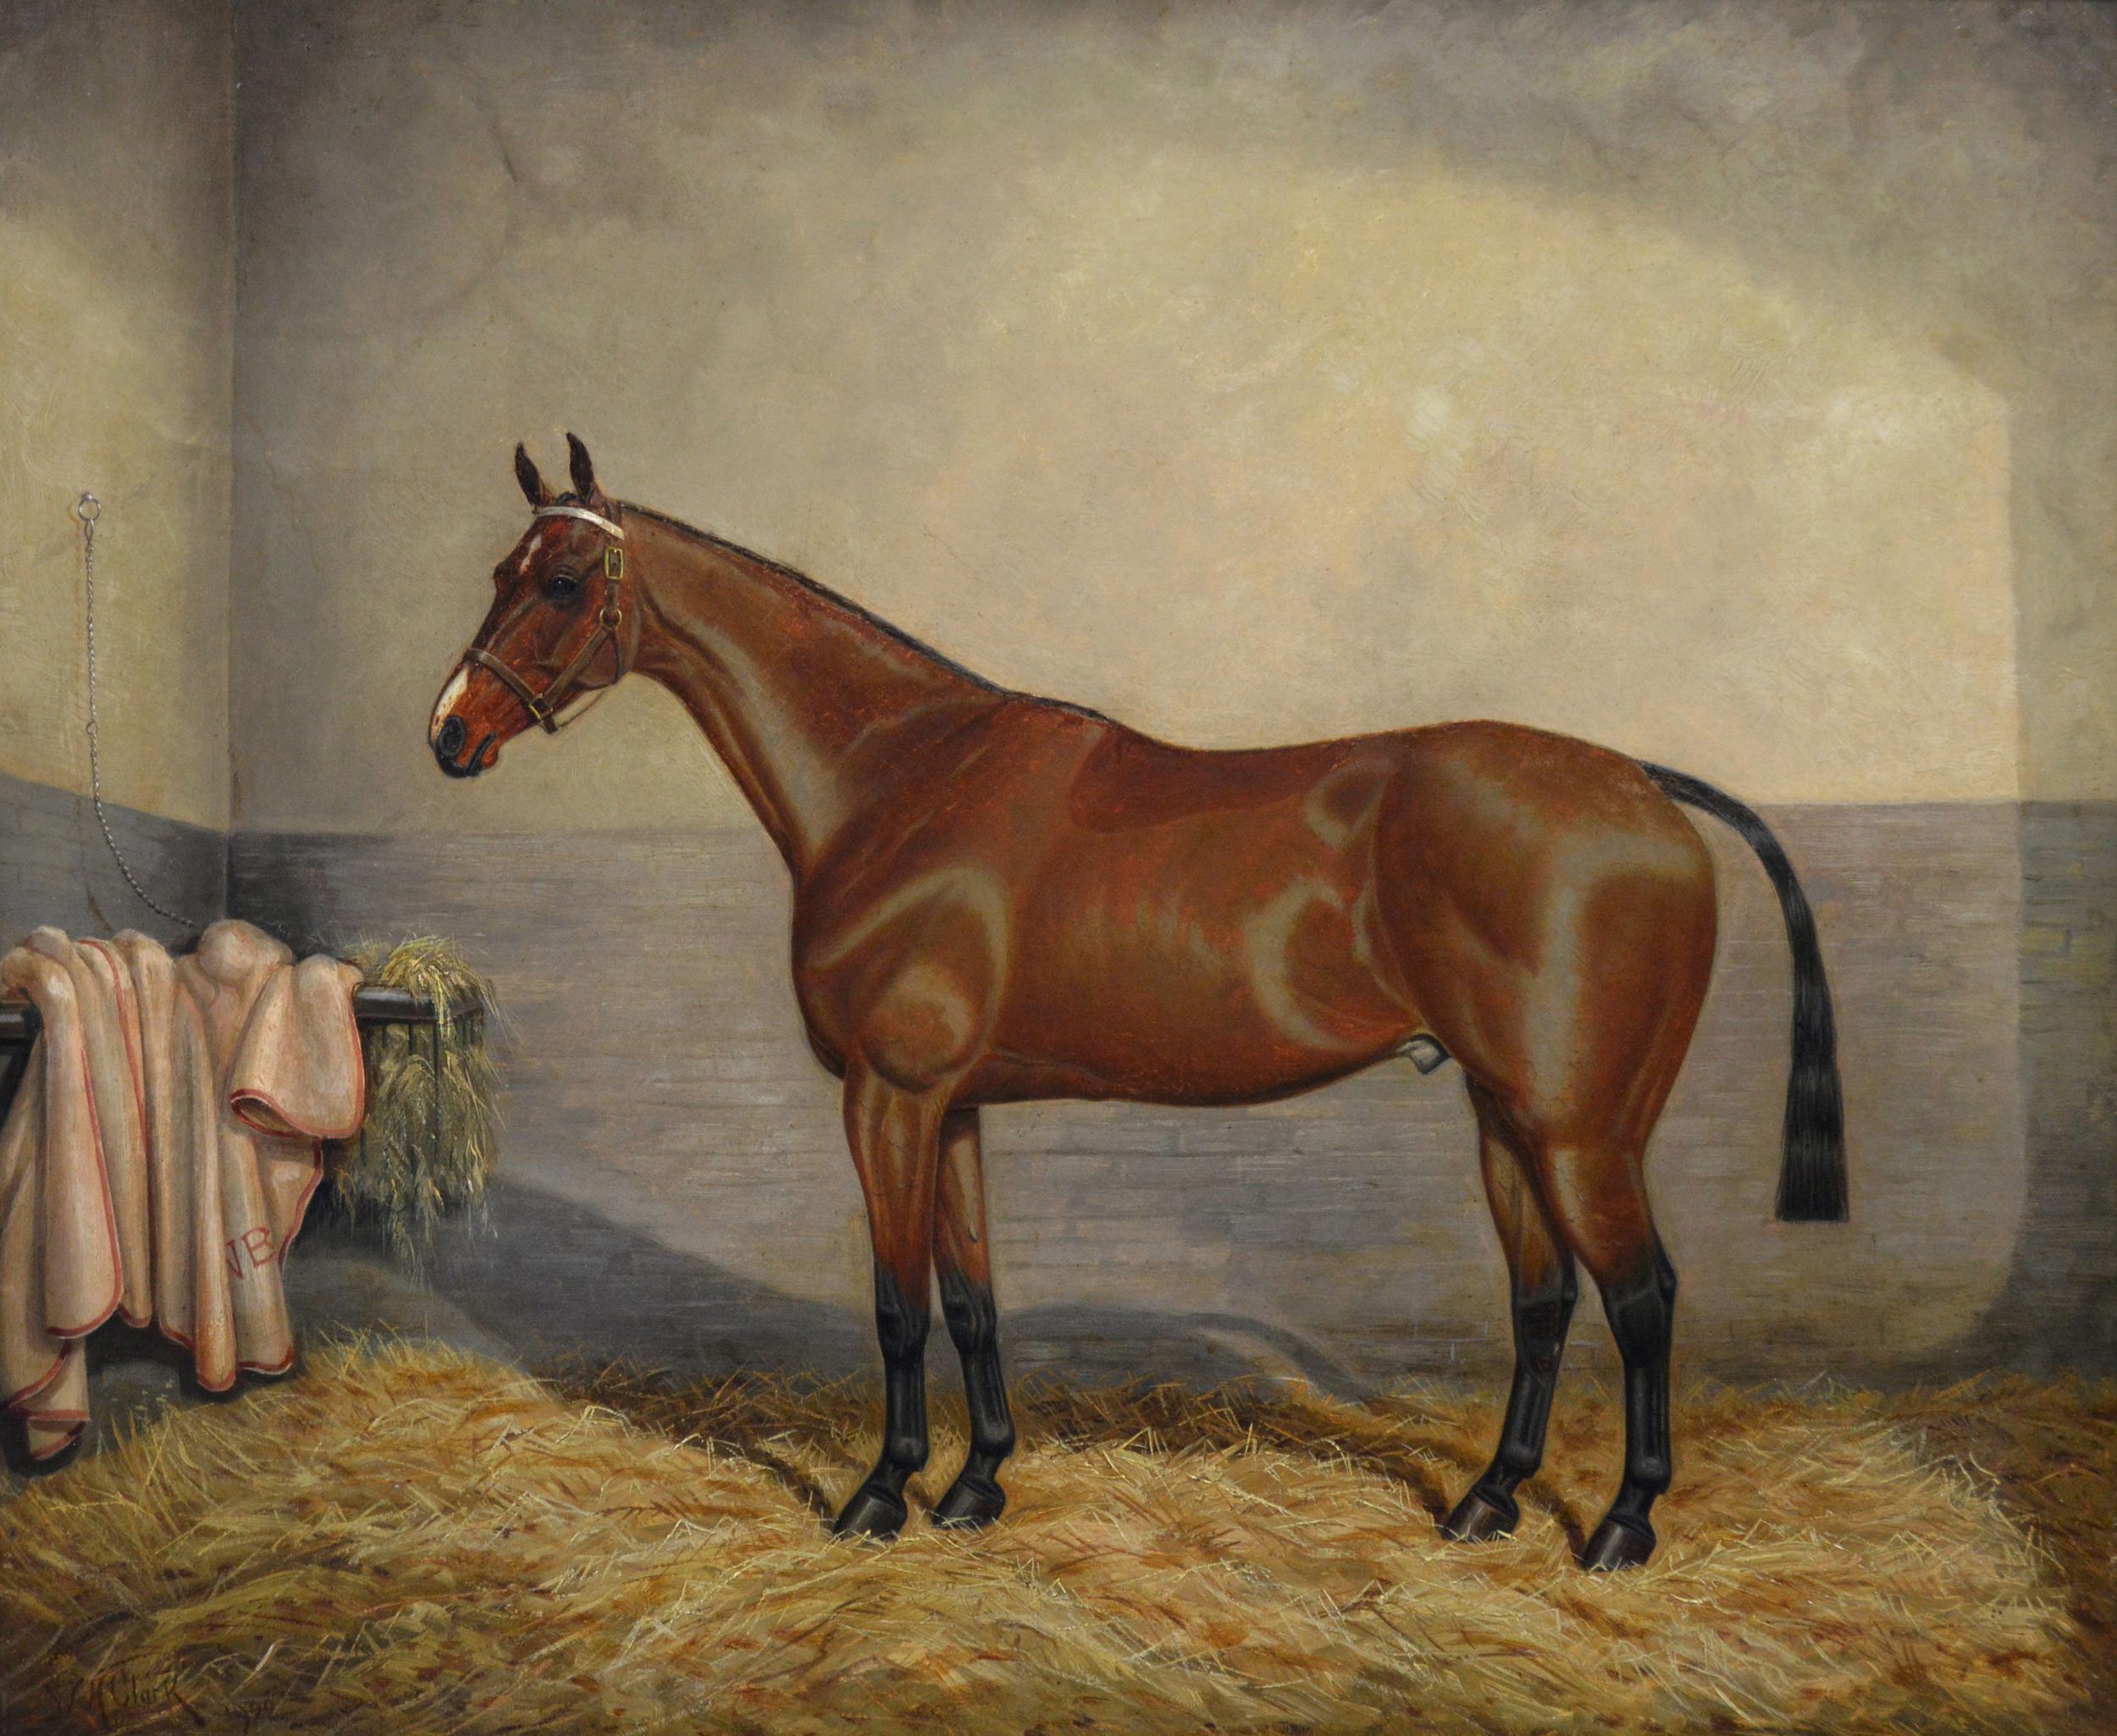 Sporting horse portrait oil painting of a bay racehorse in a stable - Painting by William Albert Clark